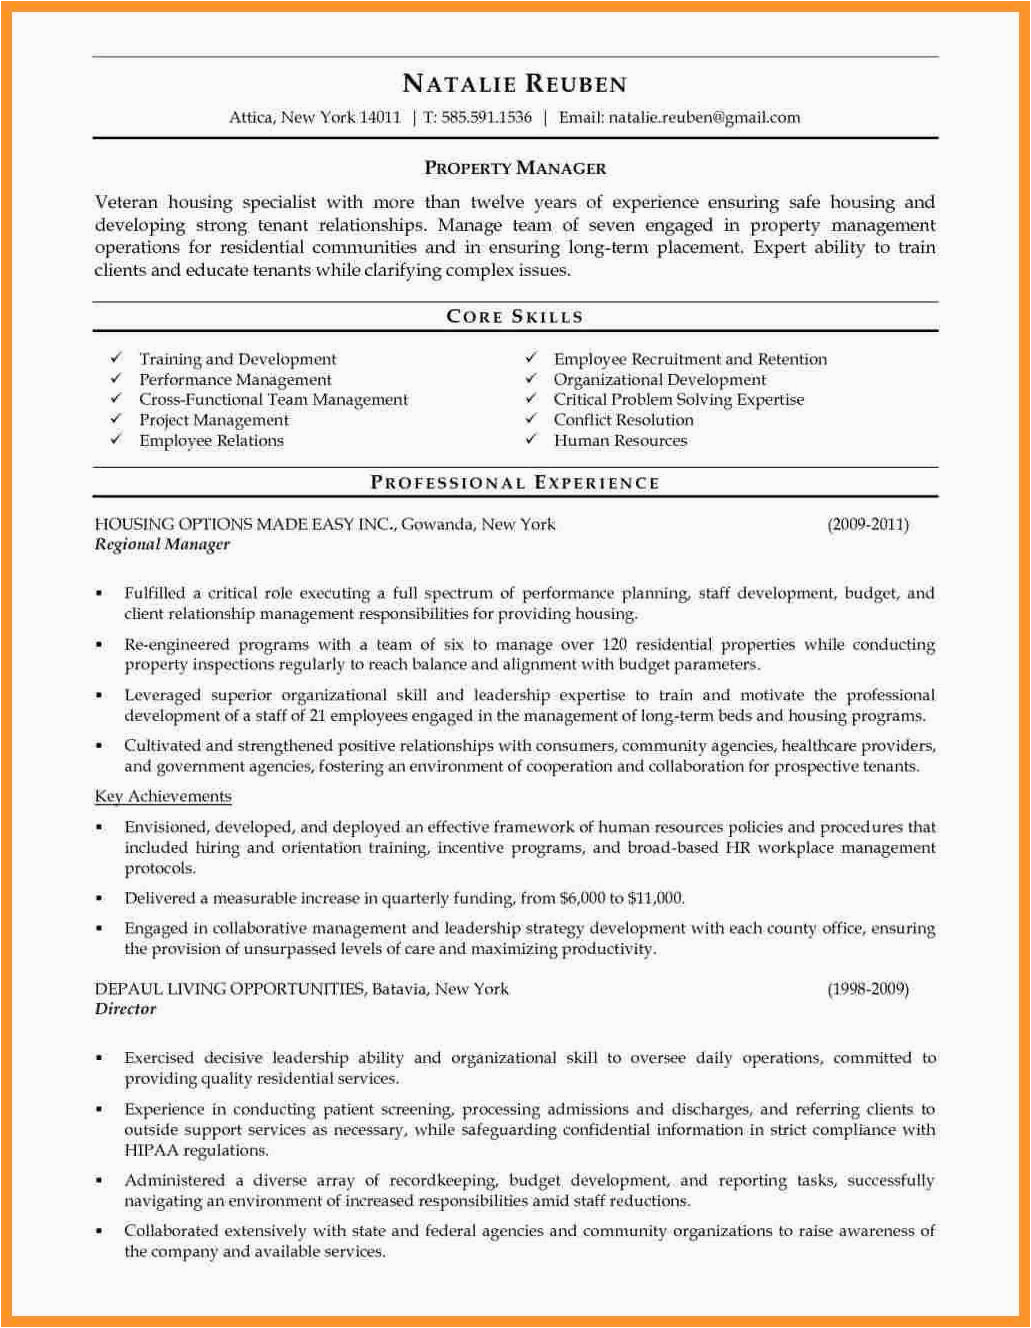 Sample Resume for Residential Property Manager 11 12 Residential Property Manager Resume Sample